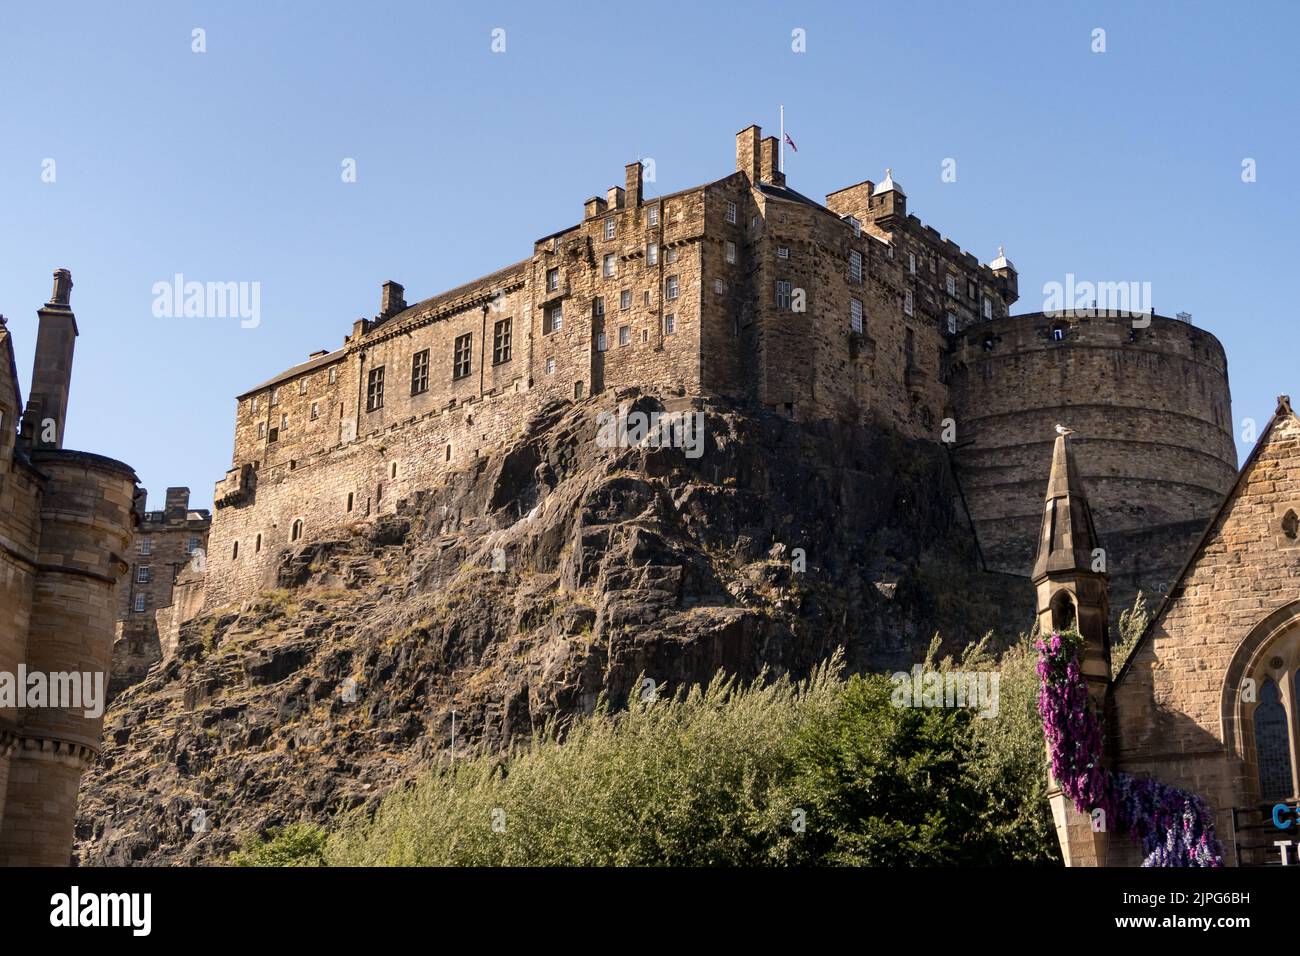 A view of Edinburgh Castle on a sunny day Stock Photo